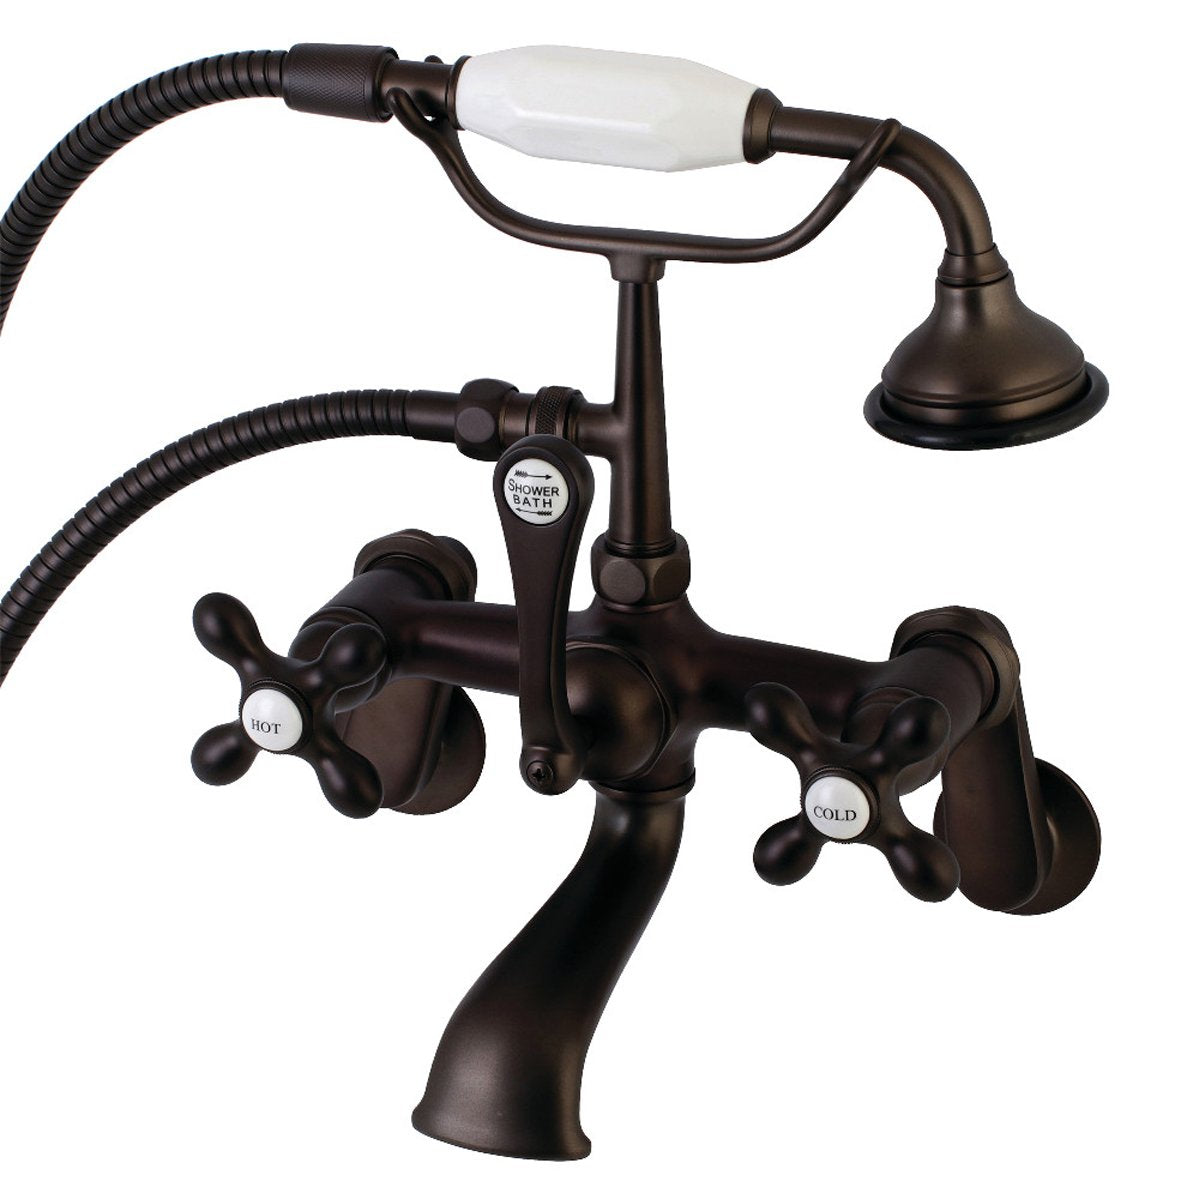 Kingston Brass Aqua Vintage Wall Mount 2-Hole Clawfoot Tub Faucet with Hand Shower